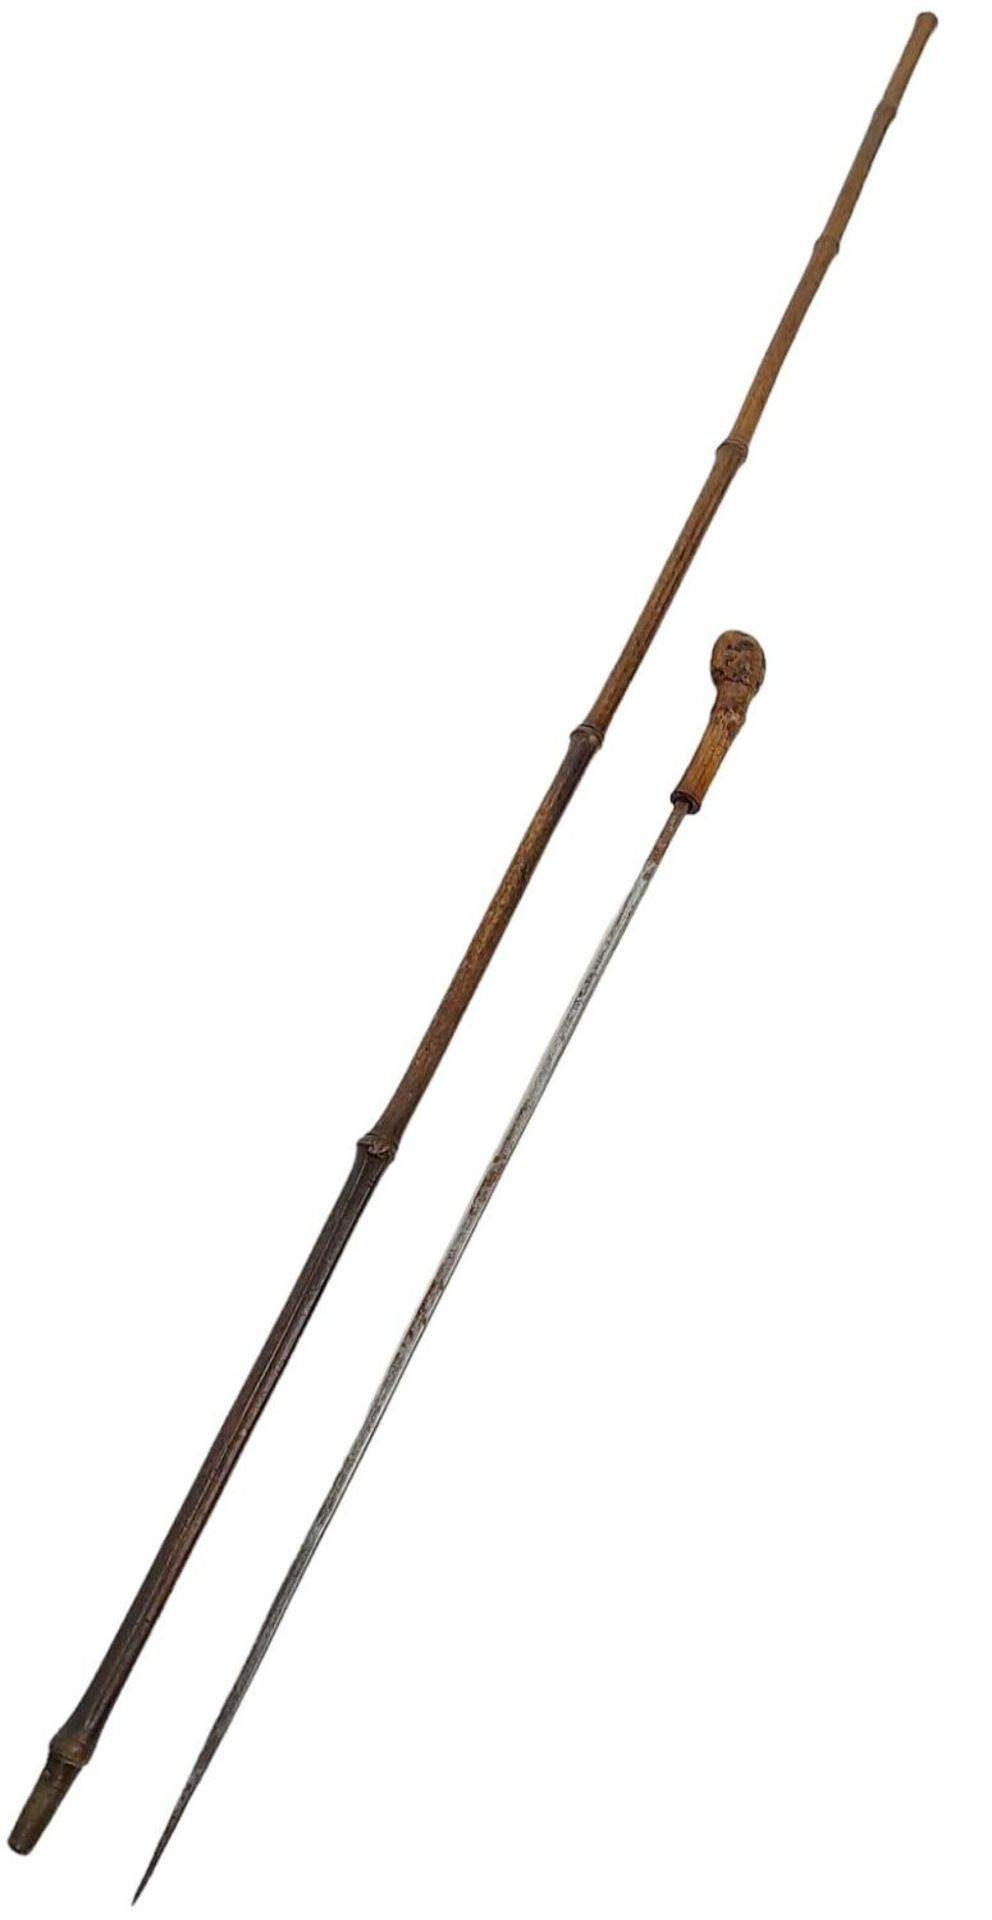 A Bamboo Swagger/Walking Sword Stick. 76cm Long in Good Condition. - Bild 3 aus 10